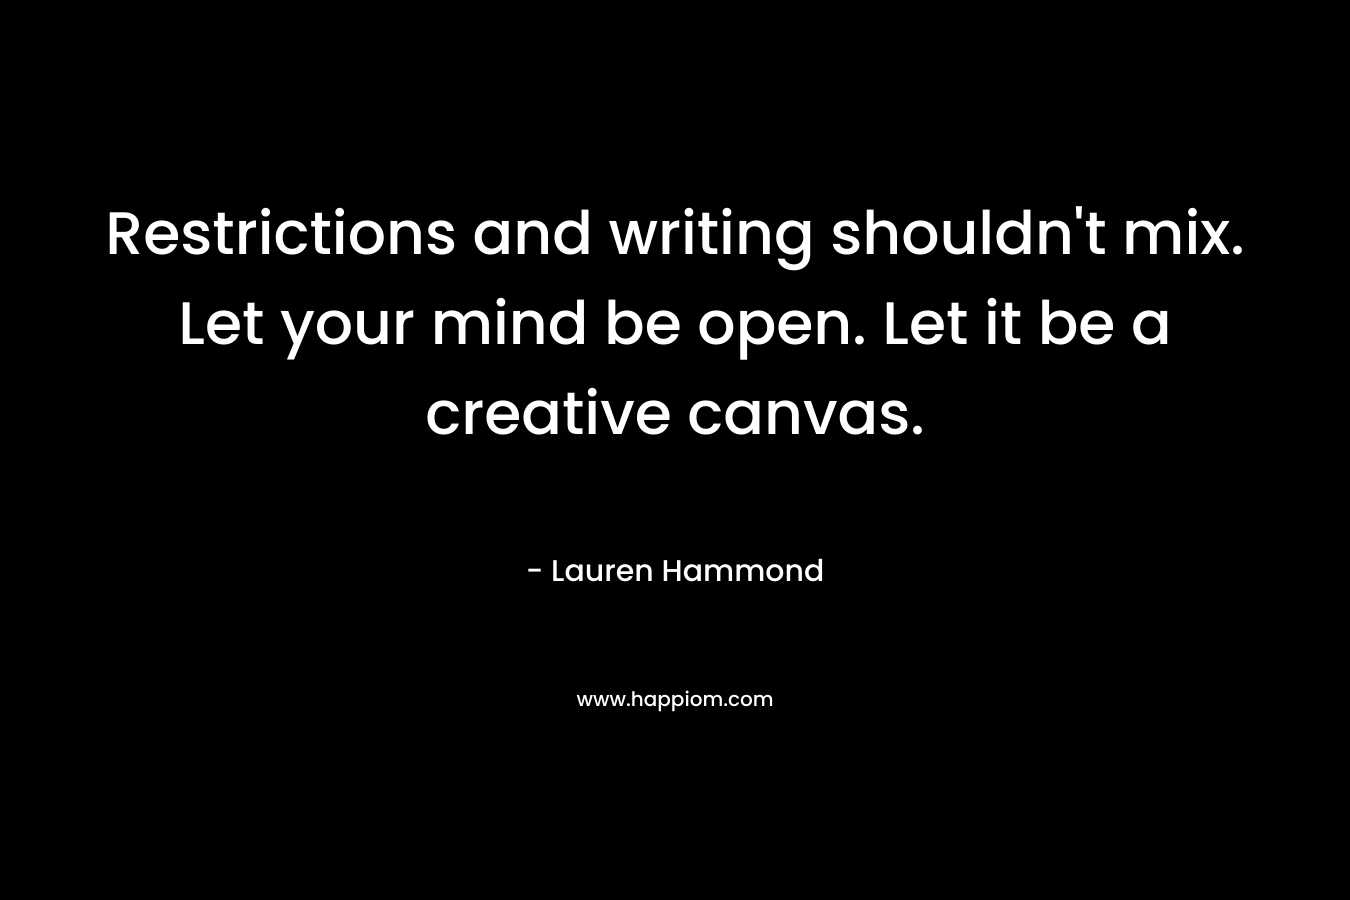 Restrictions and writing shouldn't mix. Let your mind be open. Let it be a creative canvas.